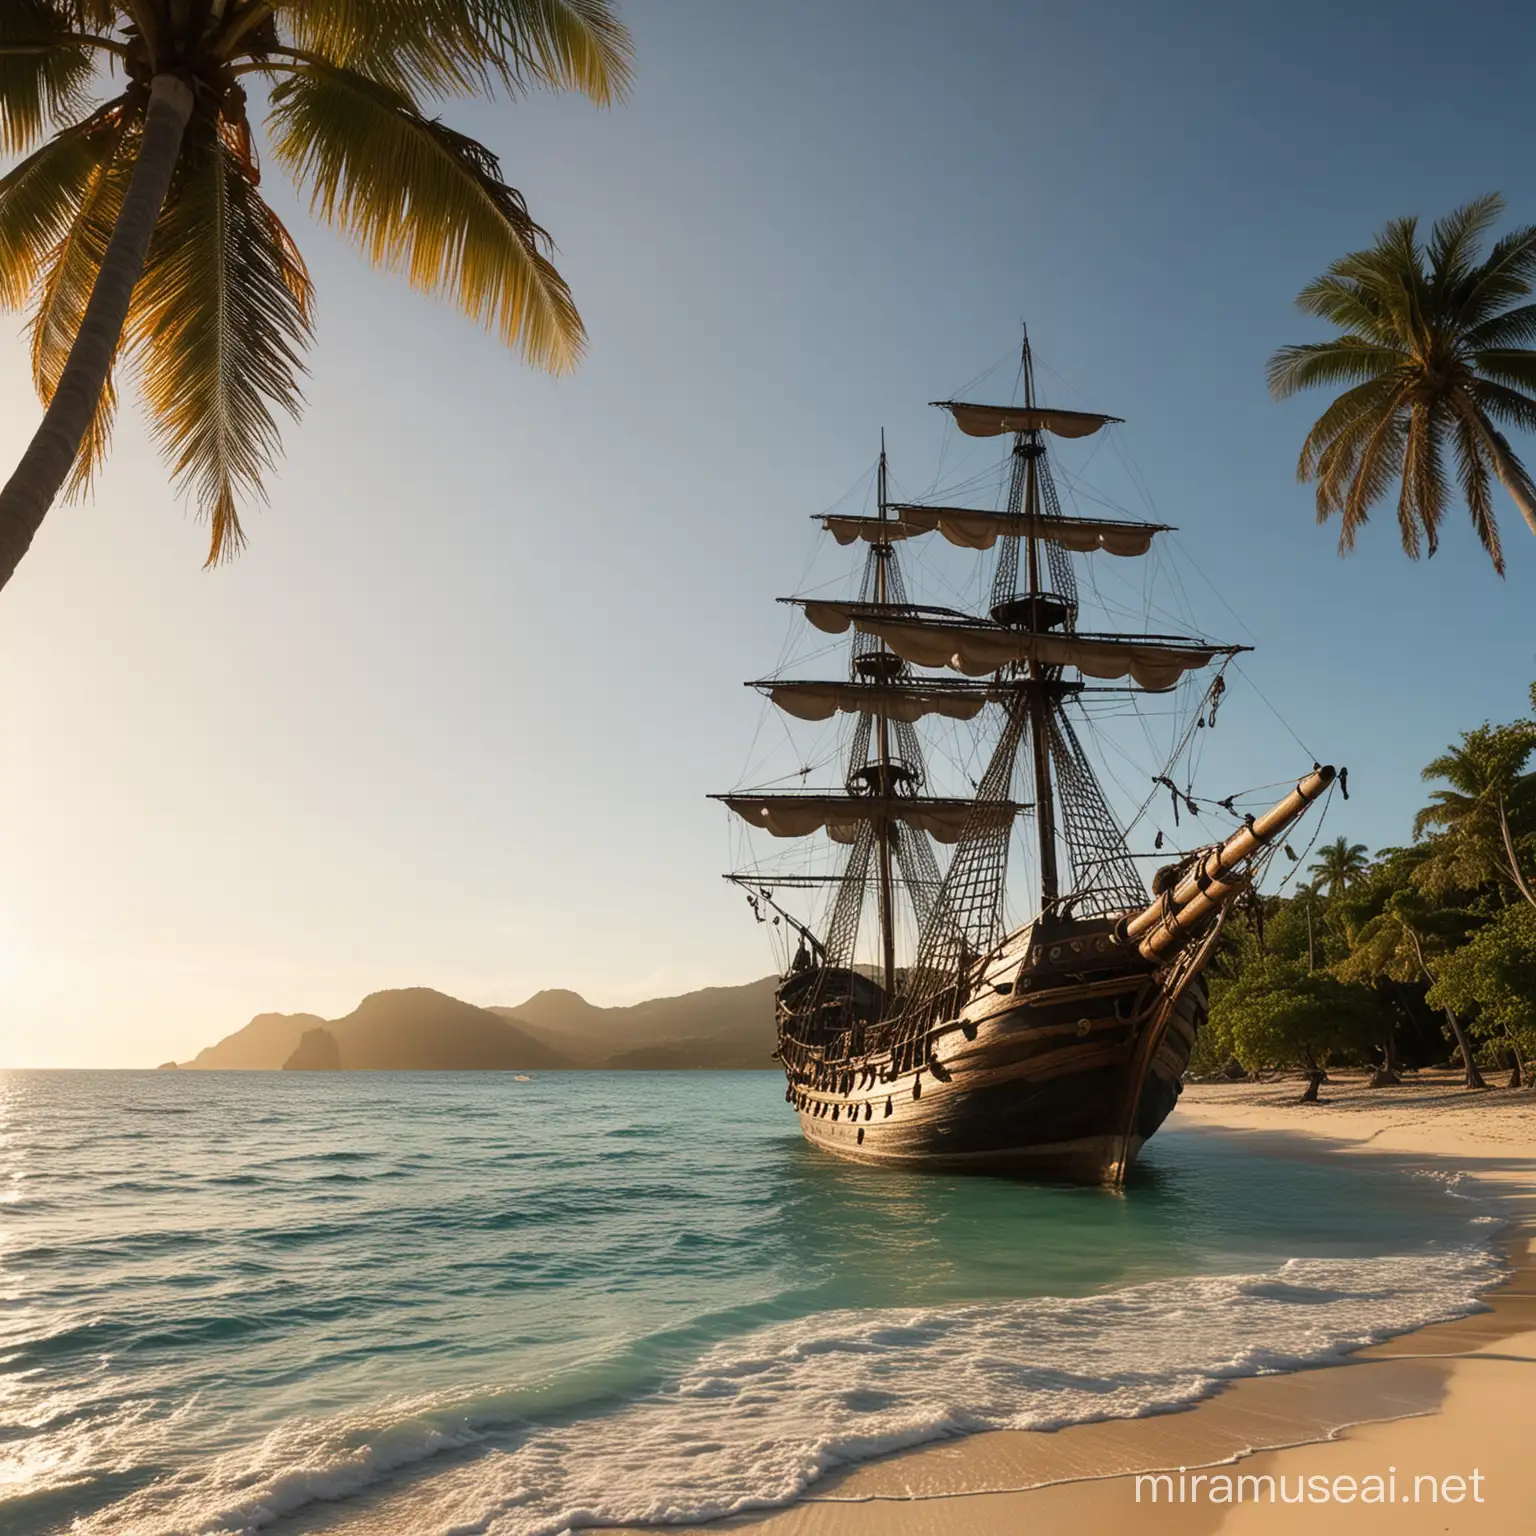 Pirate Ship Anchored in Tropical Island Bay at Sunset